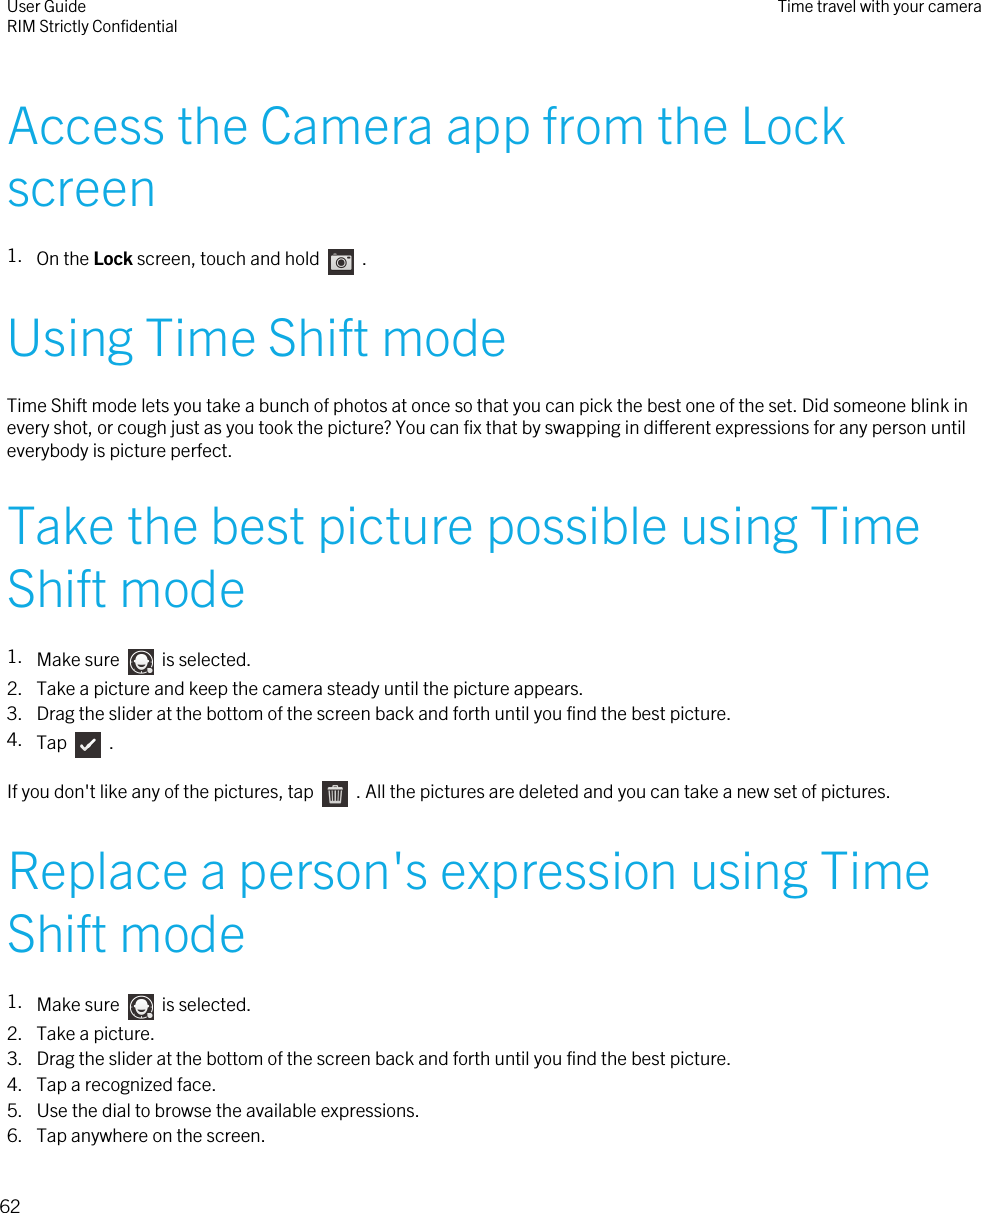 Access the Camera app from the Lockscreen1. On the Lock screen, touch and hold    .Using Time Shift modeTime Shift mode lets you take a bunch of photos at once so that you can pick the best one of the set. Did someone blink inevery shot, or cough just as you took the picture? You can fix that by swapping in different expressions for any person untileverybody is picture perfect.Take the best picture possible using TimeShift mode1. Make sure    is selected.2. Take a picture and keep the camera steady until the picture appears.3. Drag the slider at the bottom of the screen back and forth until you find the best picture.4. Tap    .If you don&apos;t like any of the pictures, tap    . All the pictures are deleted and you can take a new set of pictures.Replace a person&apos;s expression using TimeShift mode1. Make sure    is selected.2. Take a picture.3. Drag the slider at the bottom of the screen back and forth until you find the best picture.4. Tap a recognized face.5. Use the dial to browse the available expressions.6. Tap anywhere on the screen.User GuideRIM Strictly Confidential Time travel with your camera62